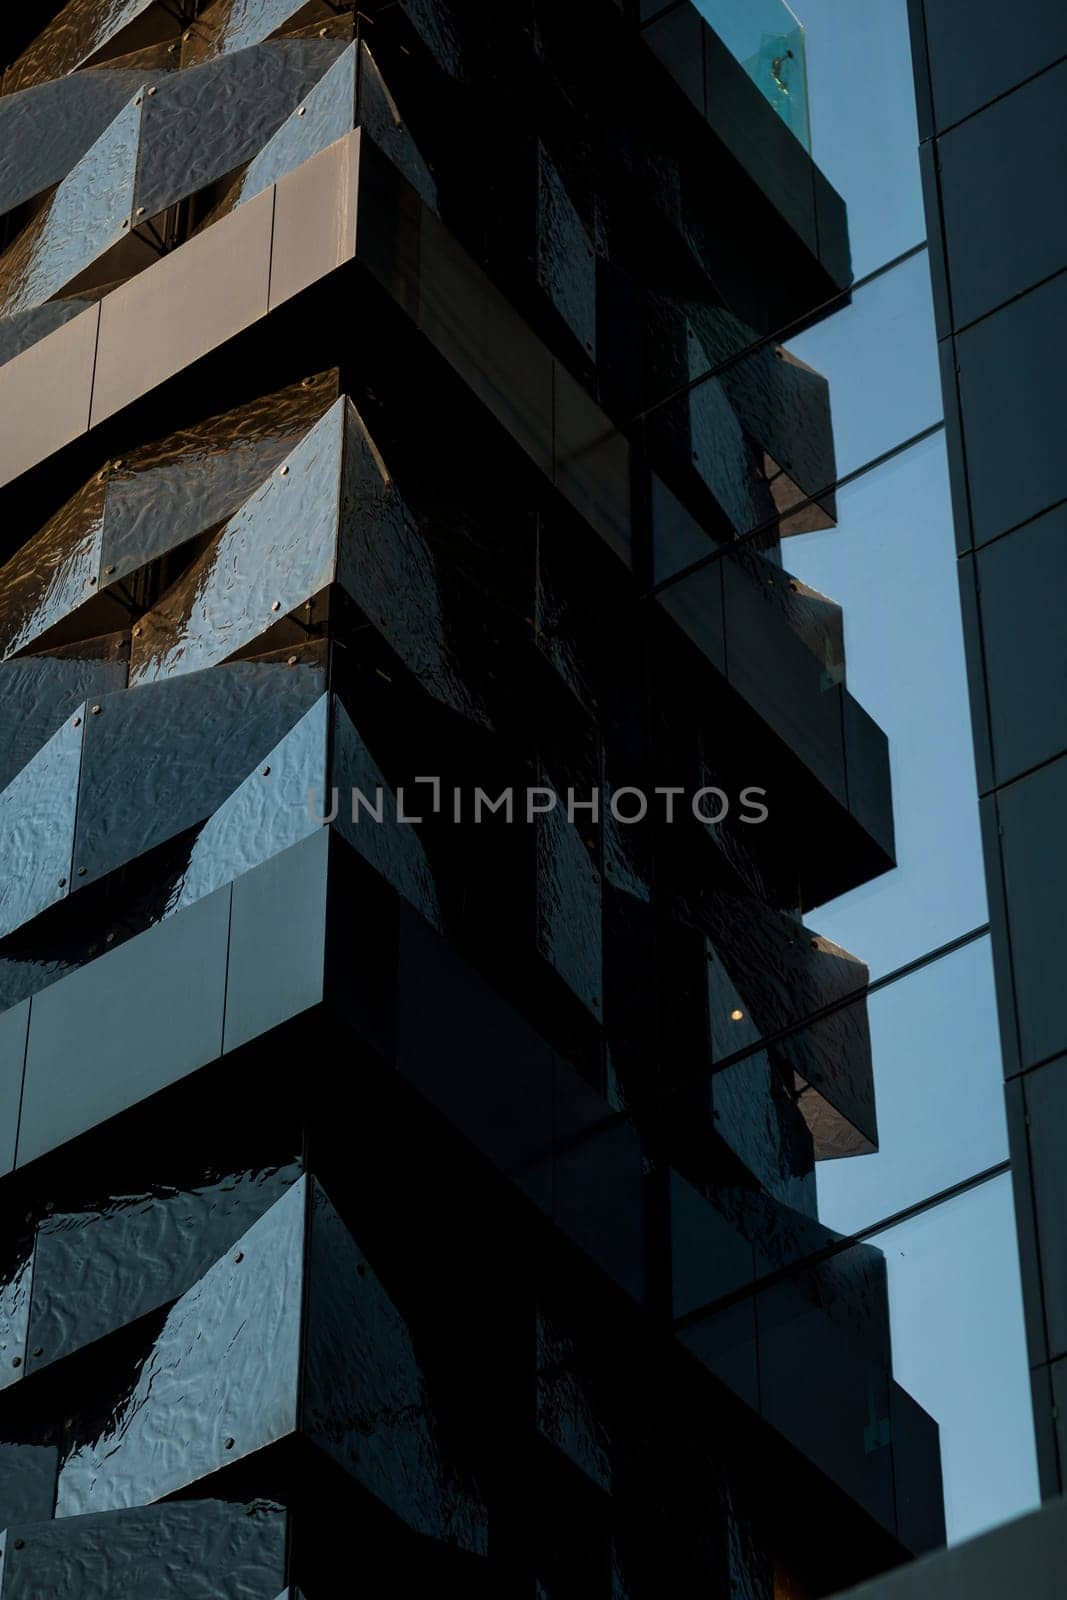  futuristic facade of the building by Ladouski